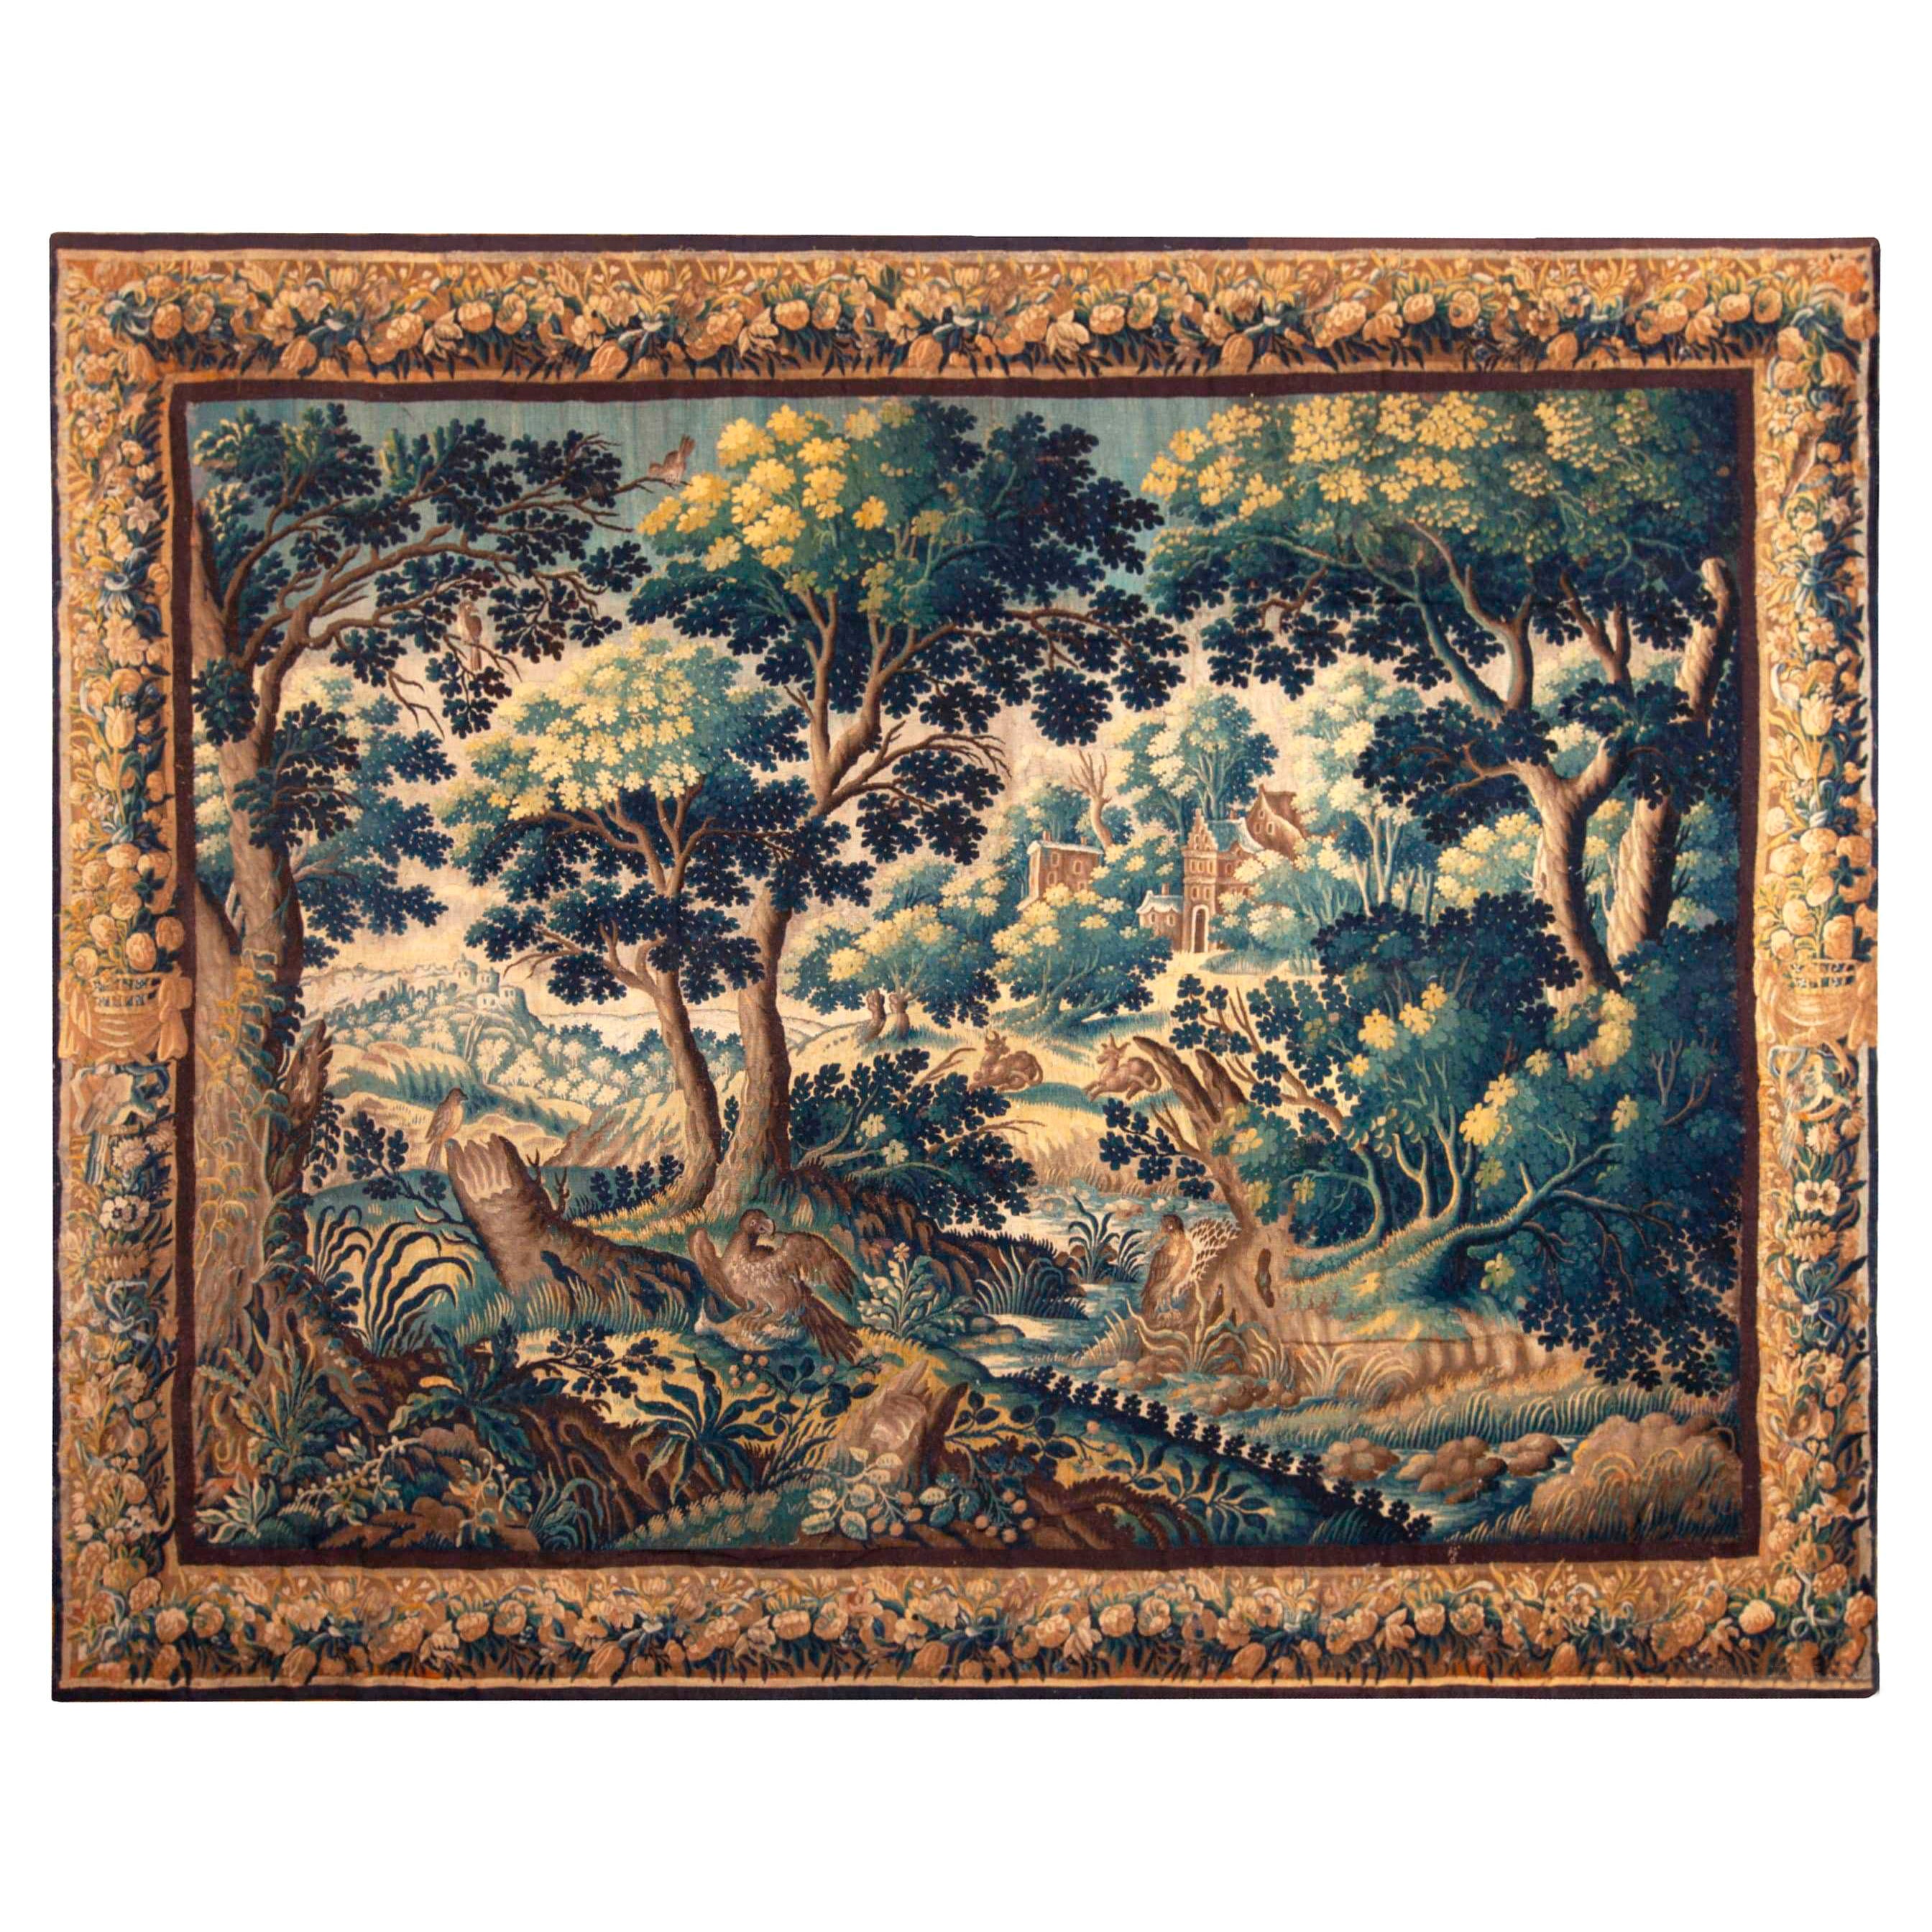 Collectible 17th Century Antique French Silk Verdure Tapestry 10' x 12'5"